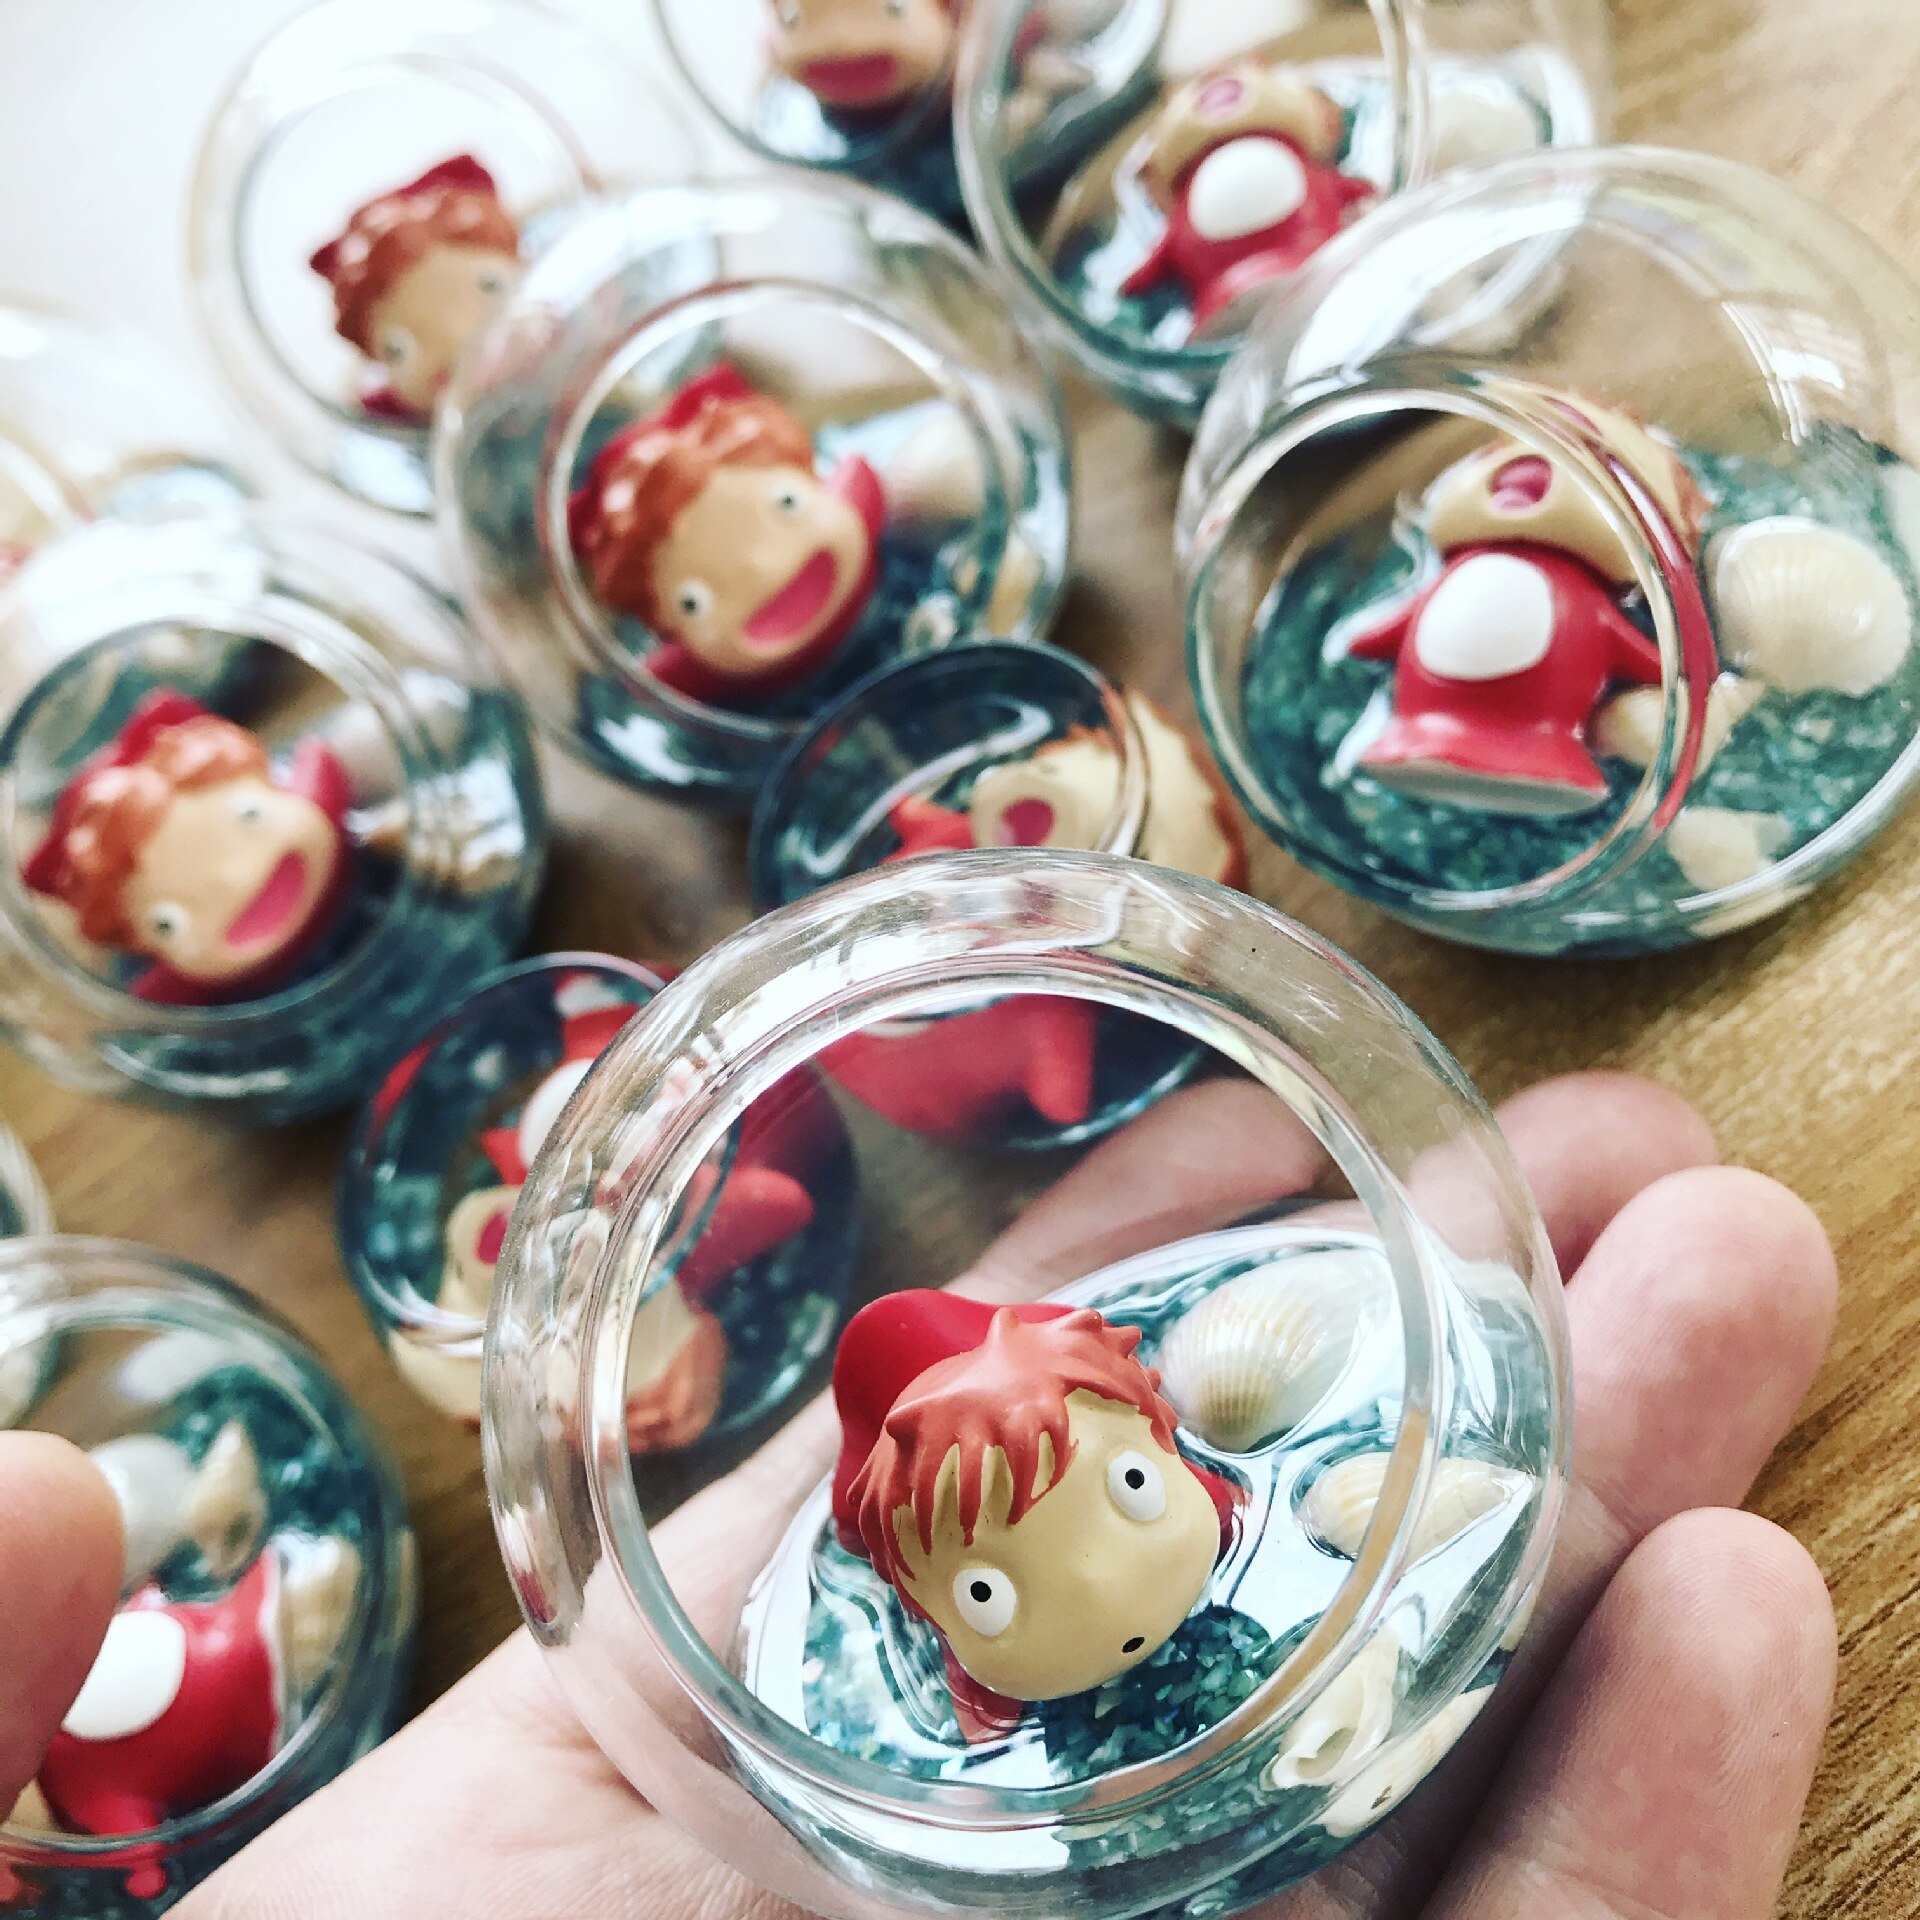 Ponyo – Ponyo Themed Cute and Wholesome Toy Figures (4 Designs) Action & Toy Figures